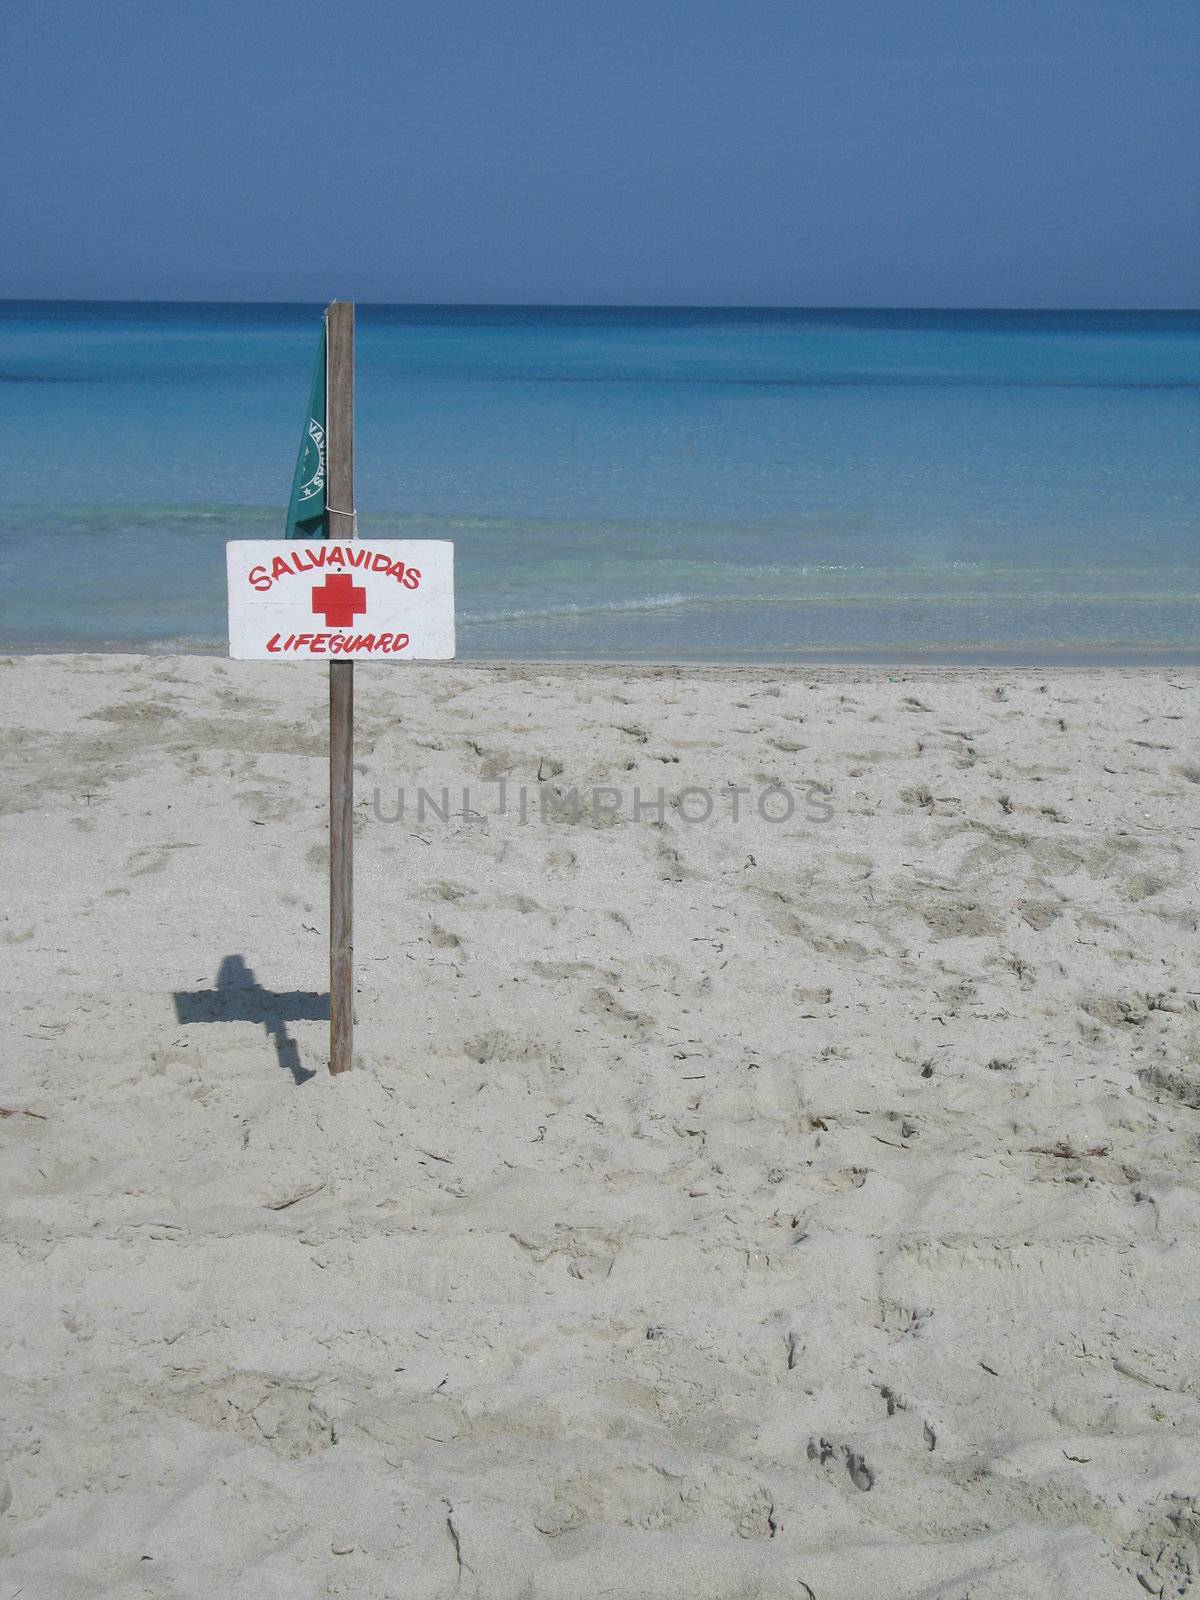 lifeguard sign by mmm